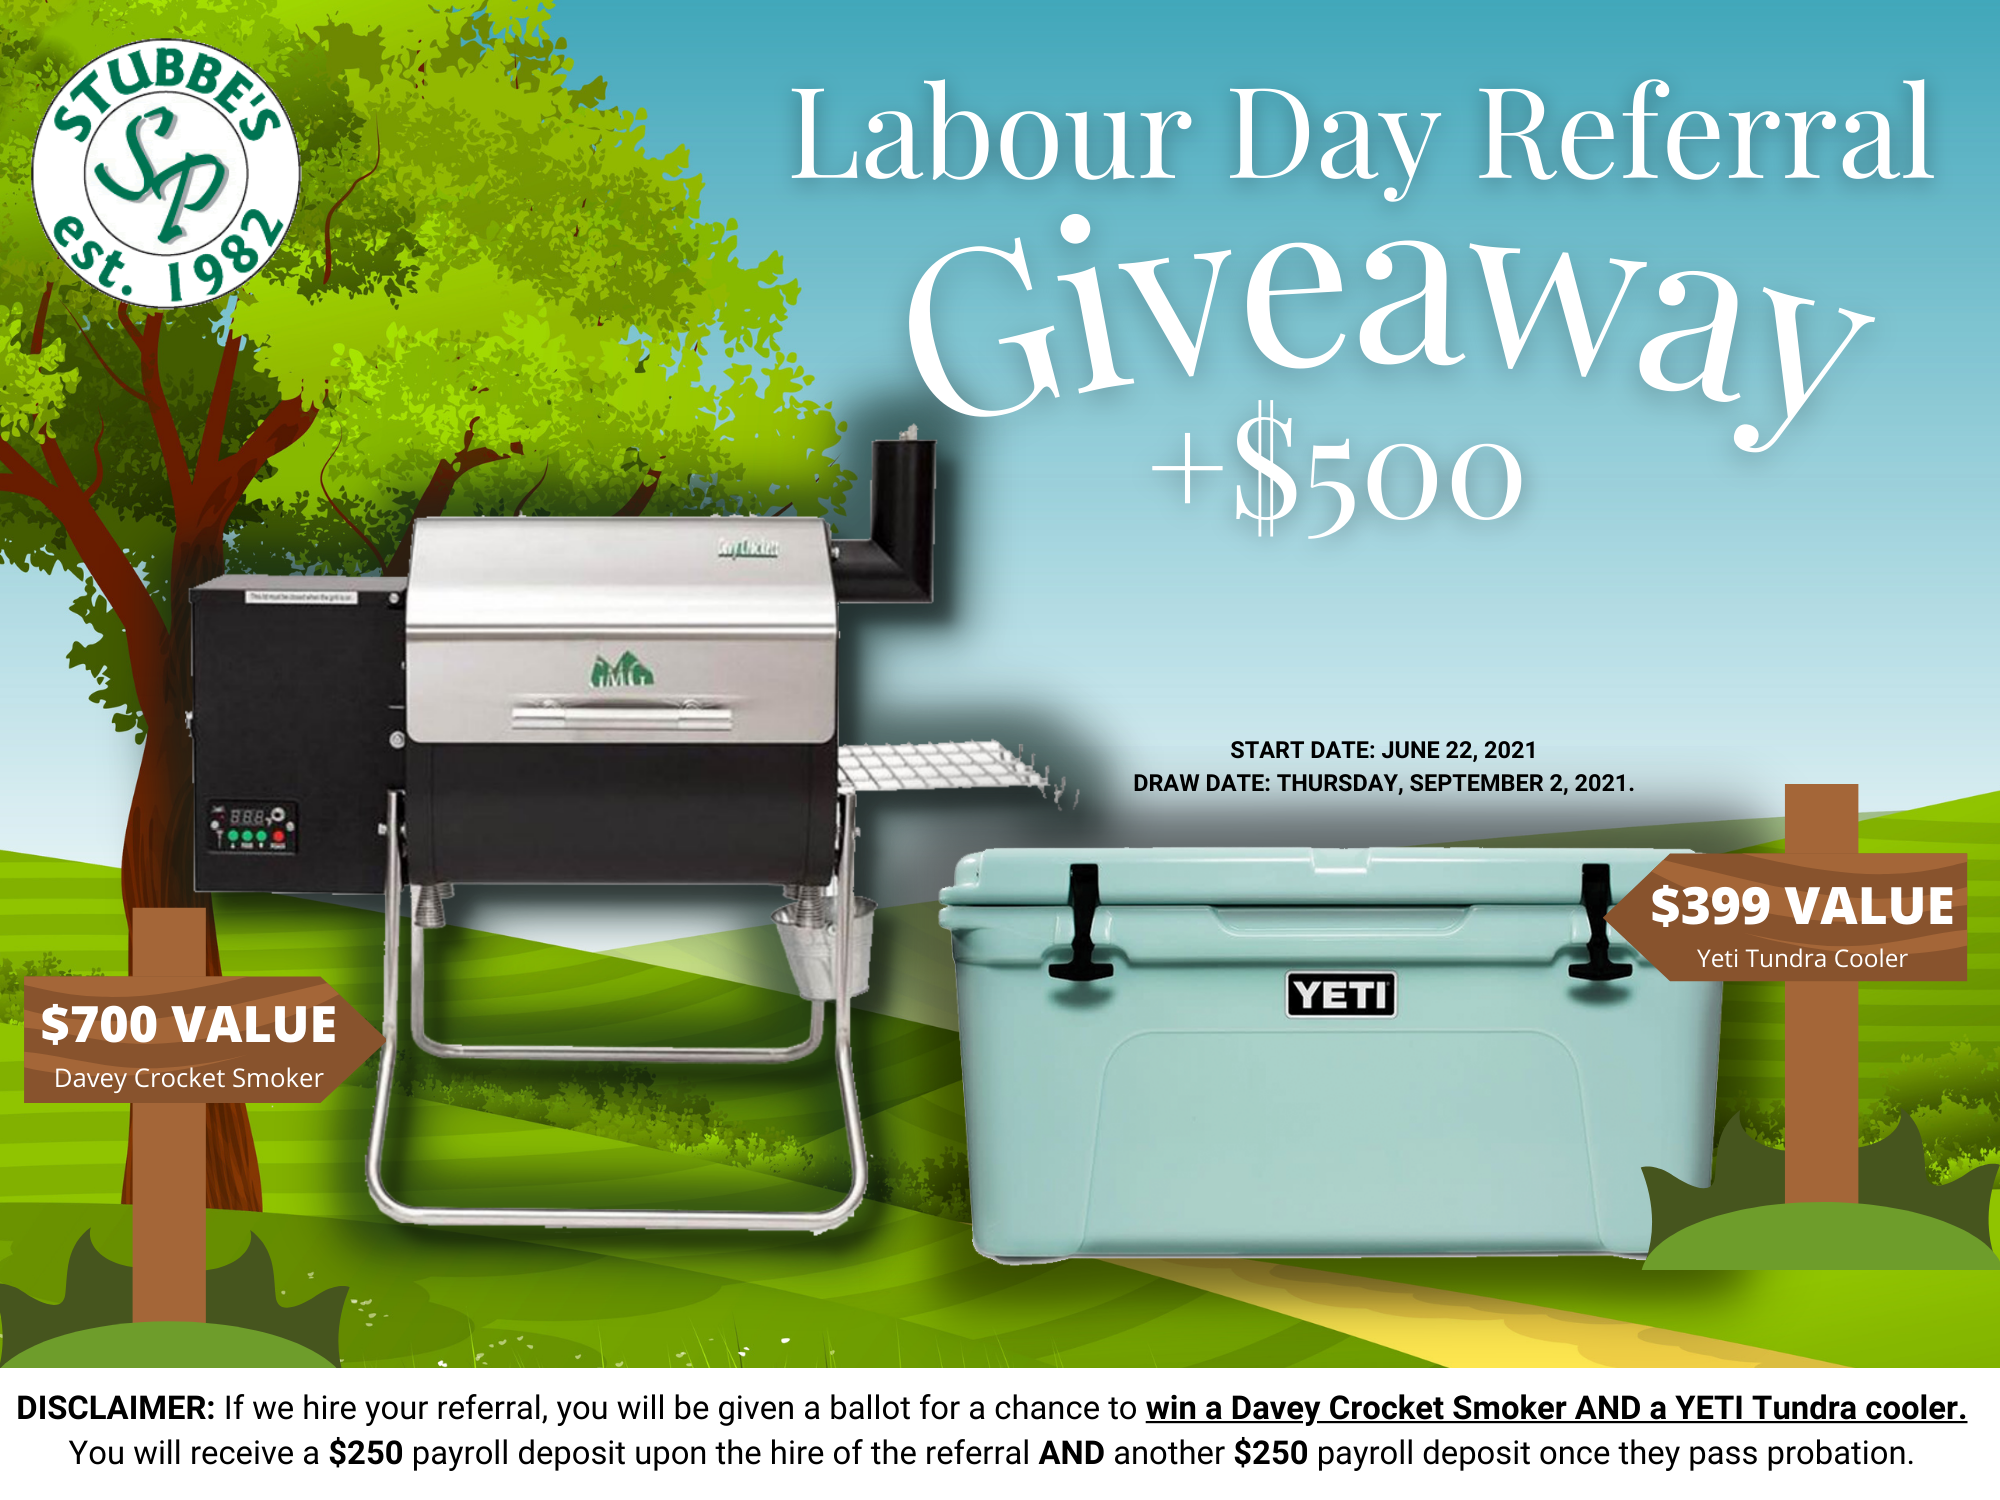 Labour Day Employee Referral Giveaway!